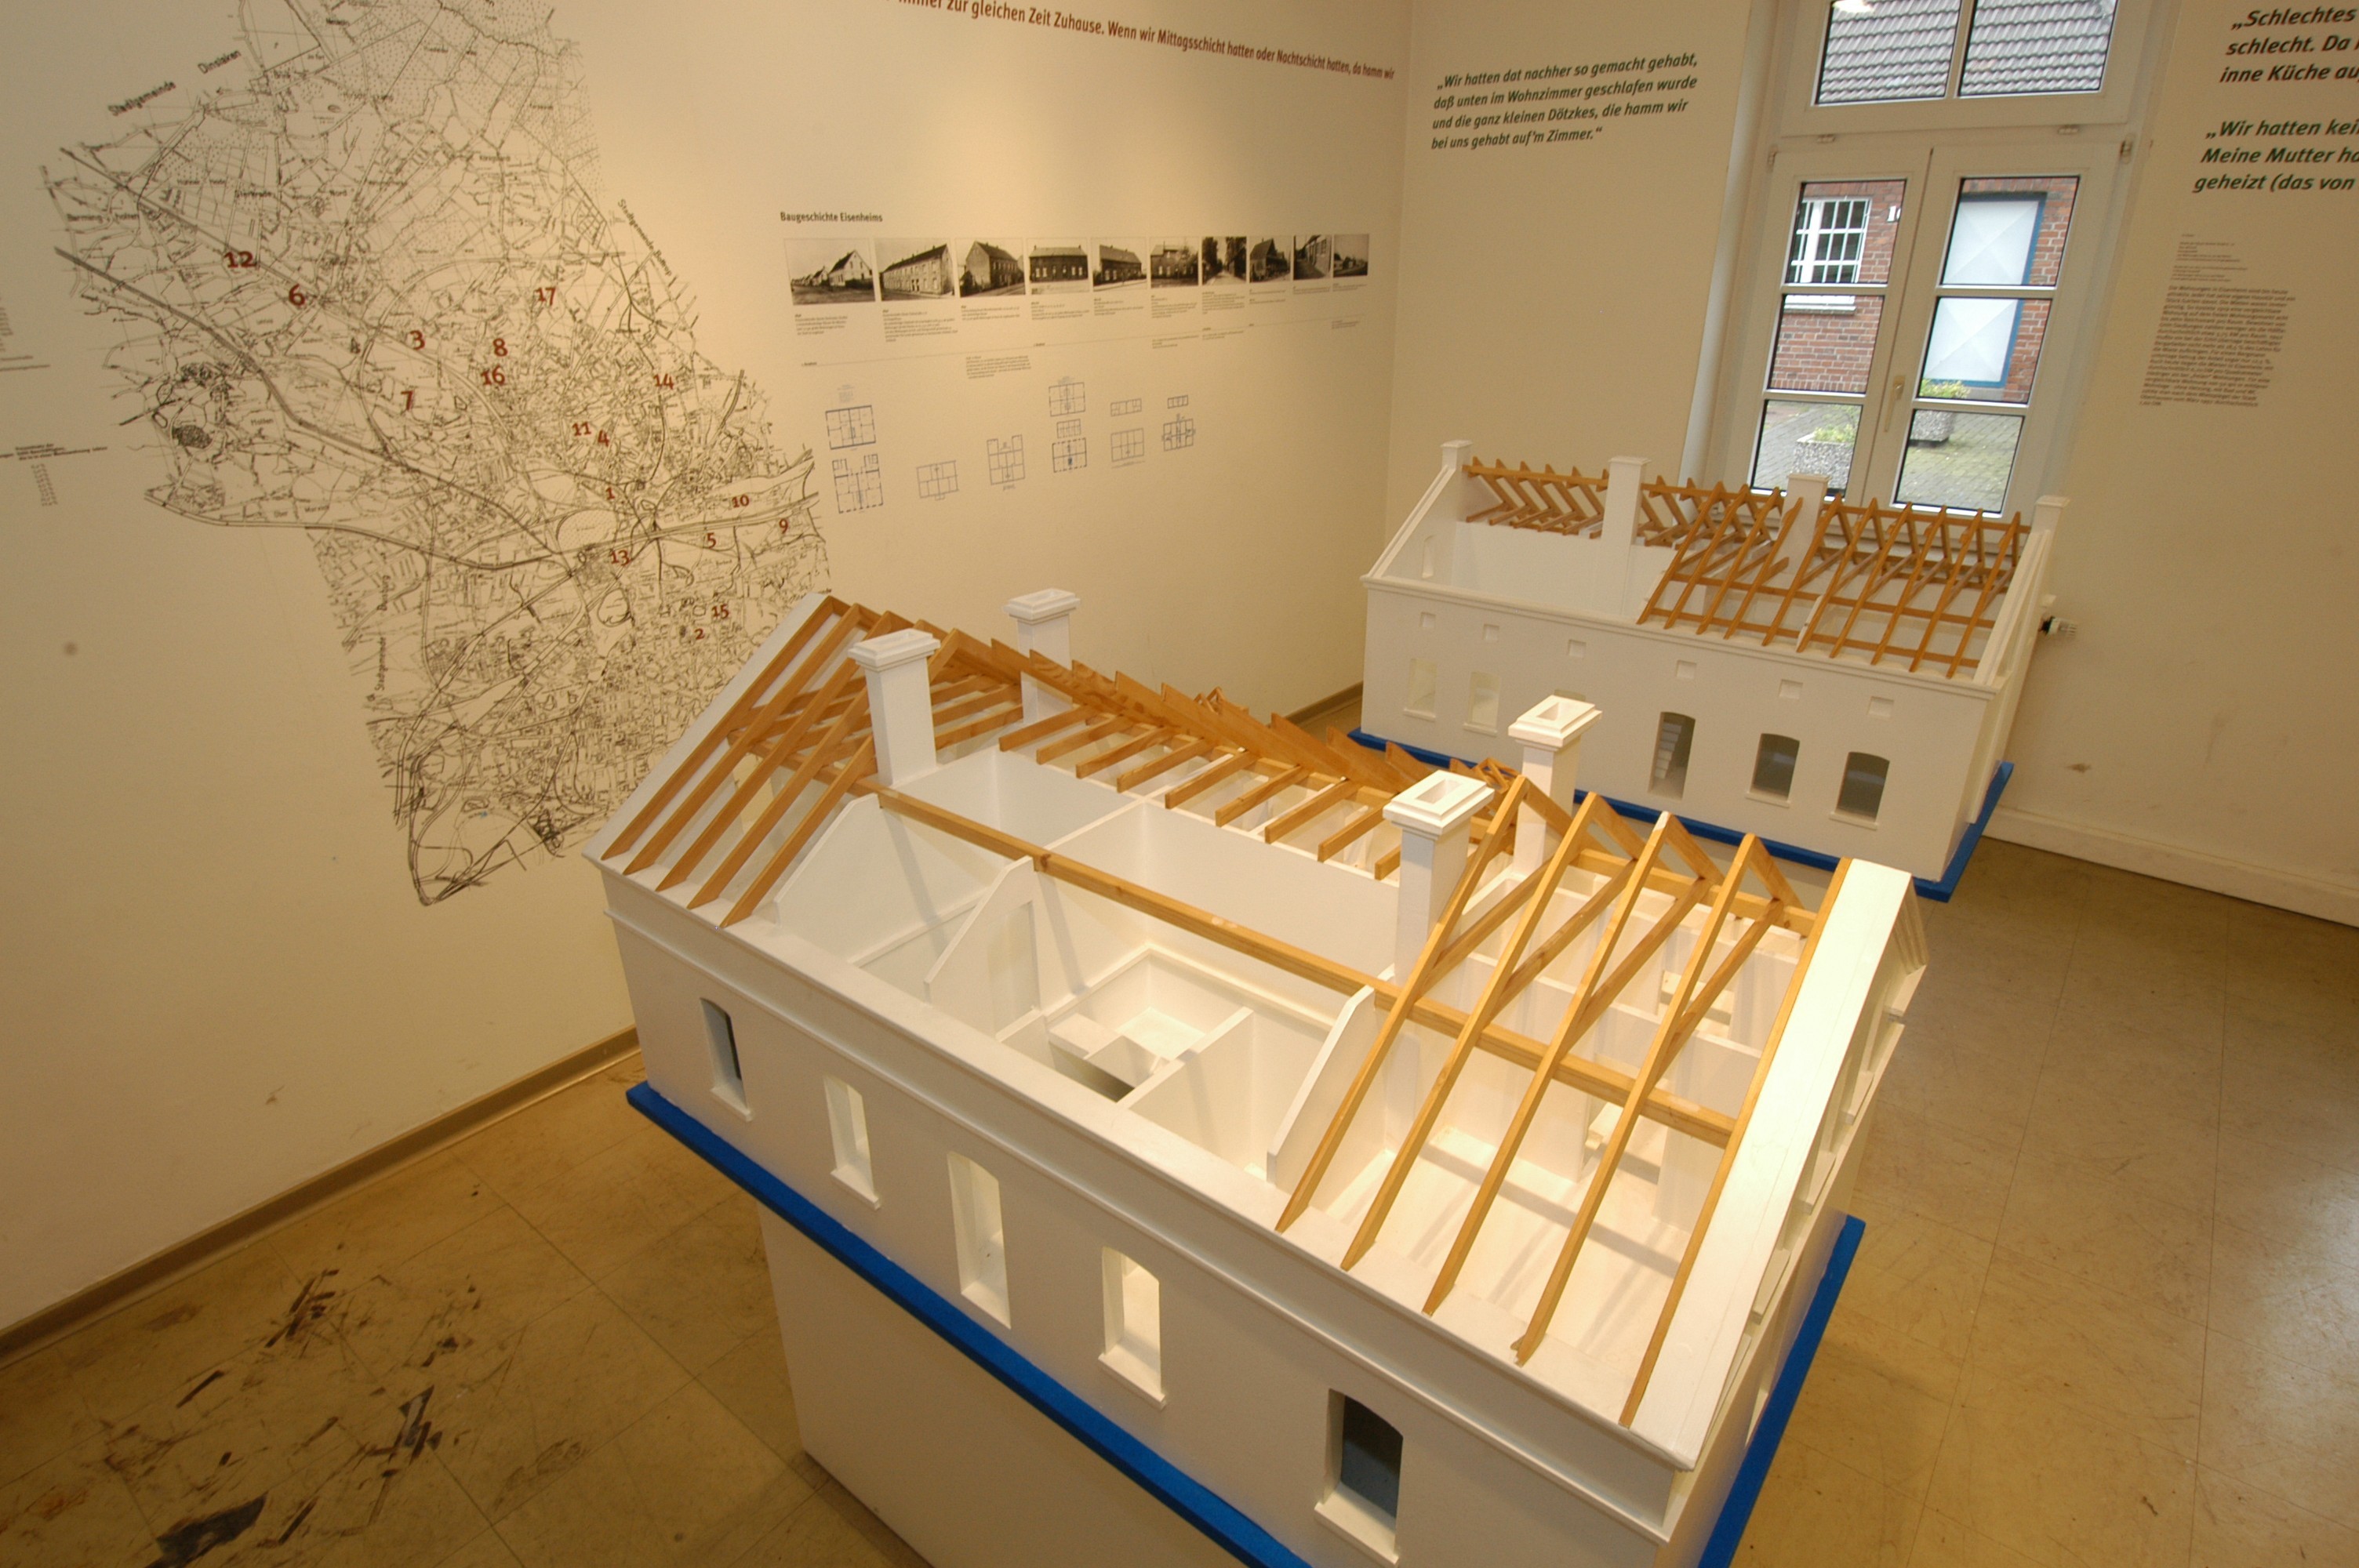 Models of the floor plan of the houses are on display in the former kitchen-cum-living room. These illustrate the architectural development during the construction of the workers’ housing. 